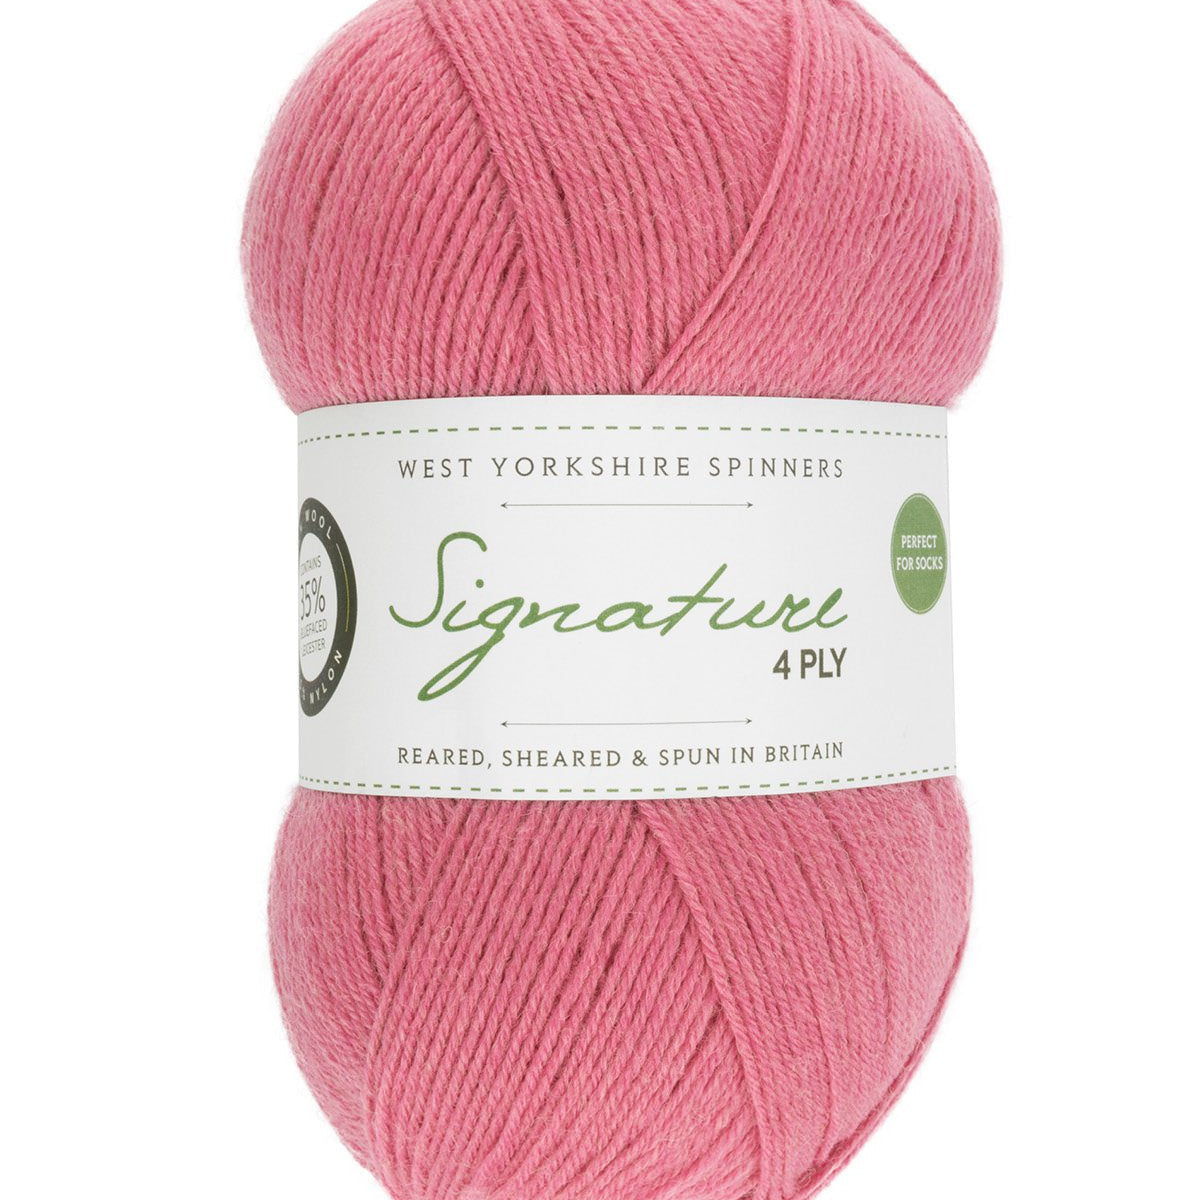 SIGNATURE 4PLY 234-Honeysuckle - West Yorkshire Spinners